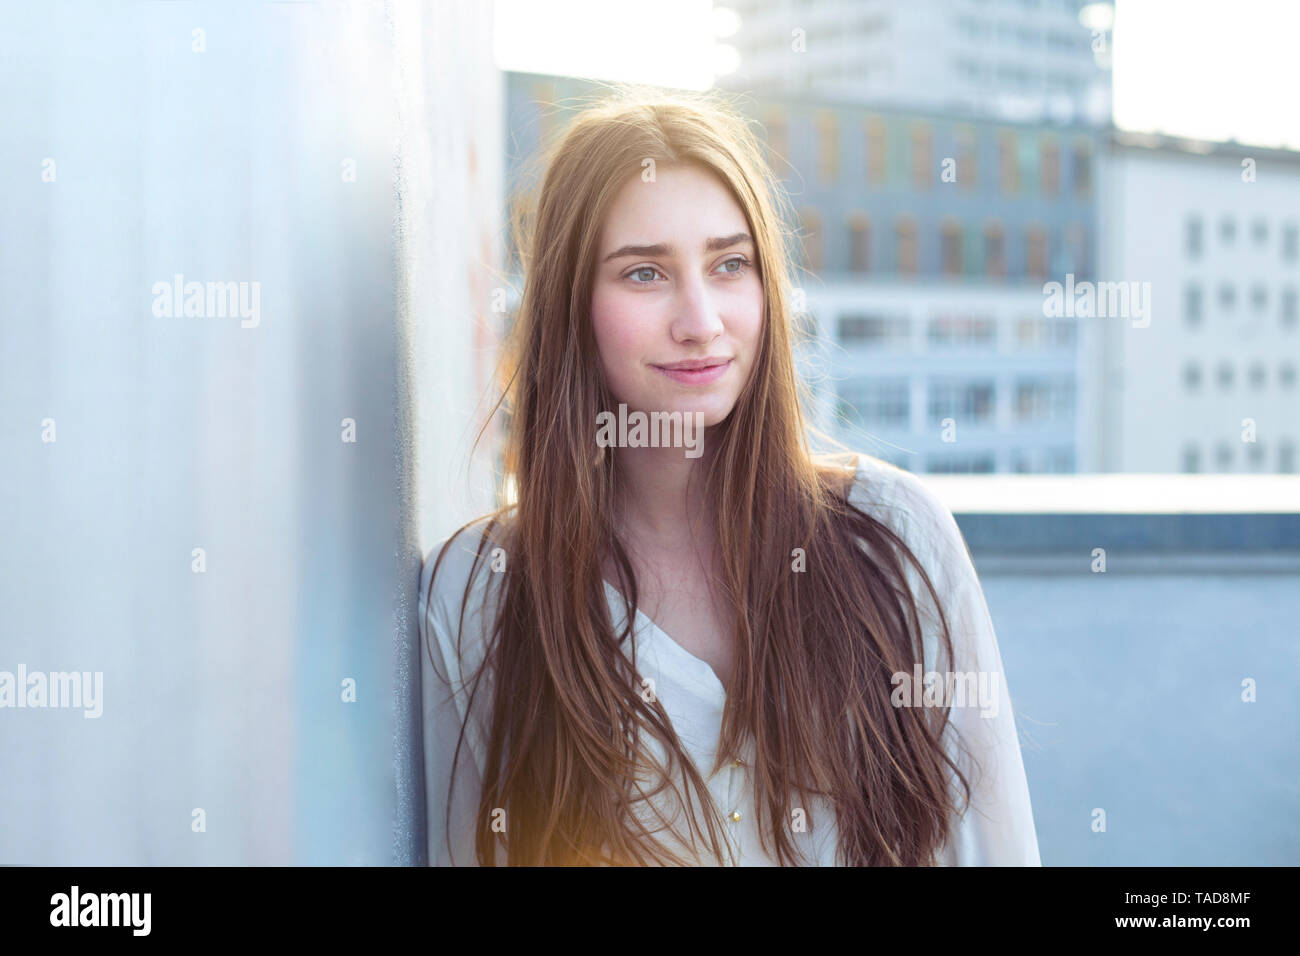 Portrait of smiling young woman leaning against a wall Stock Photo